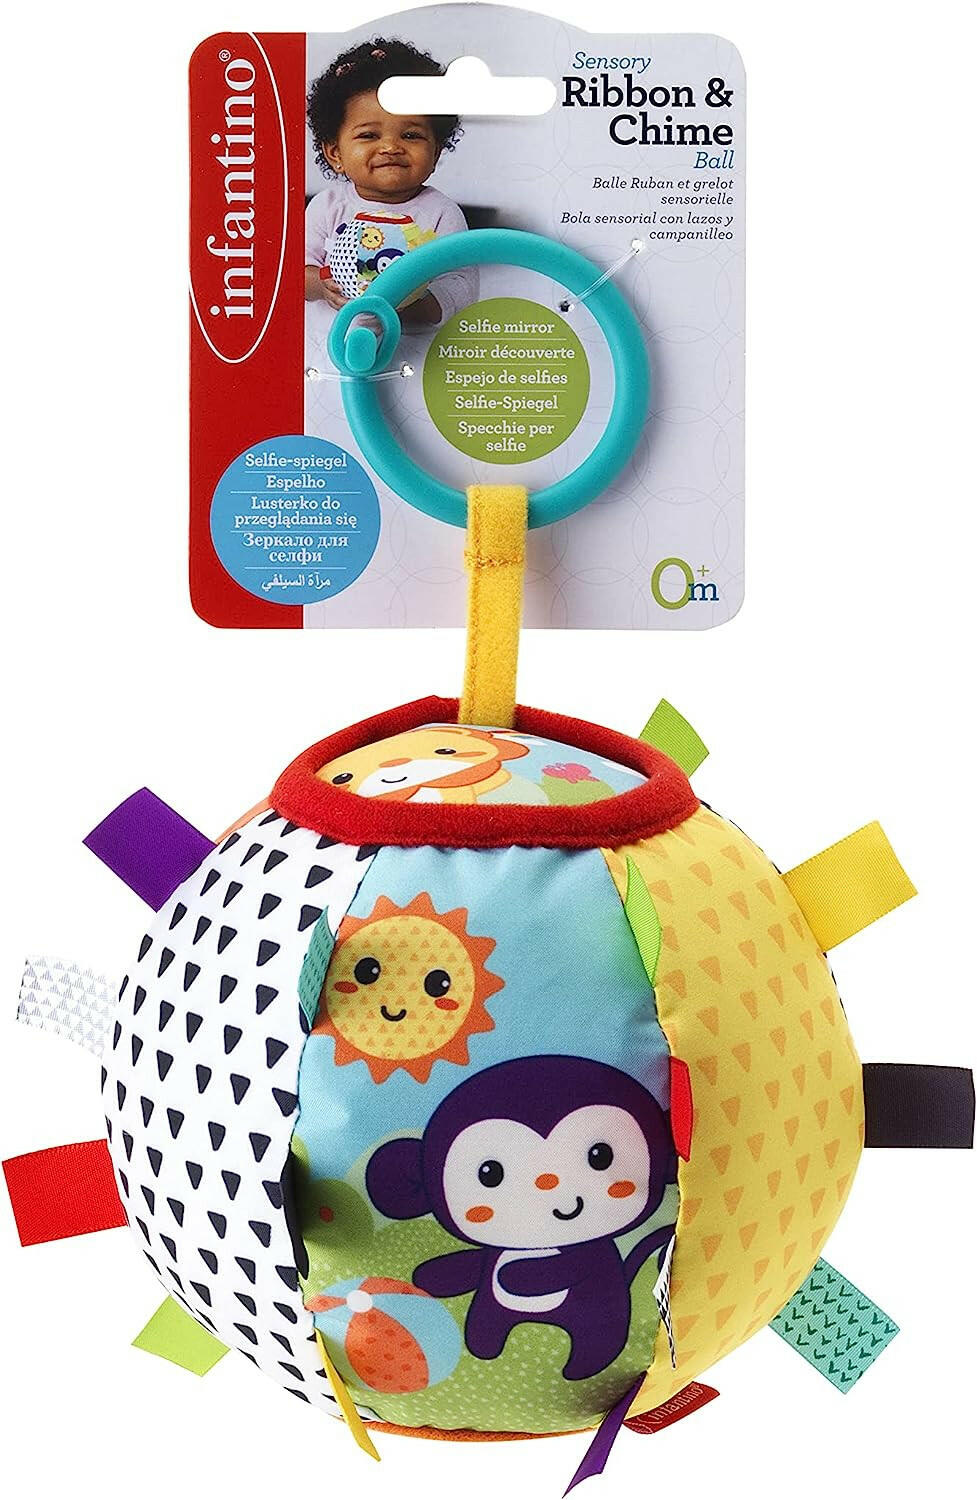 Infantino Sensory Ribbon & Chime Ball Toy for Baby From 0 Months and Above Multicolor.